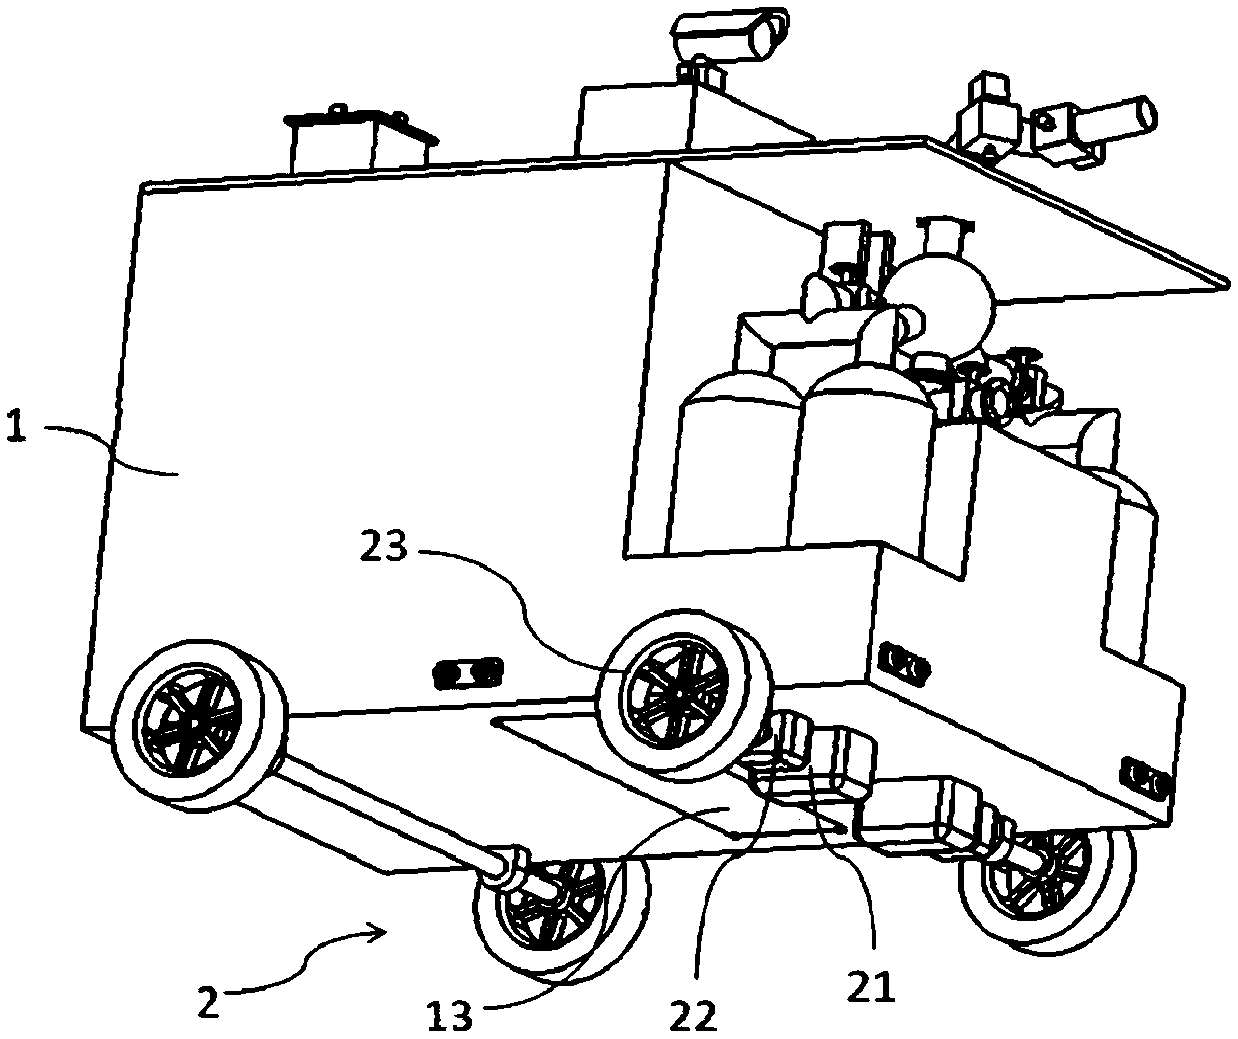 Intelligent fire-fighting robot and control method thereof